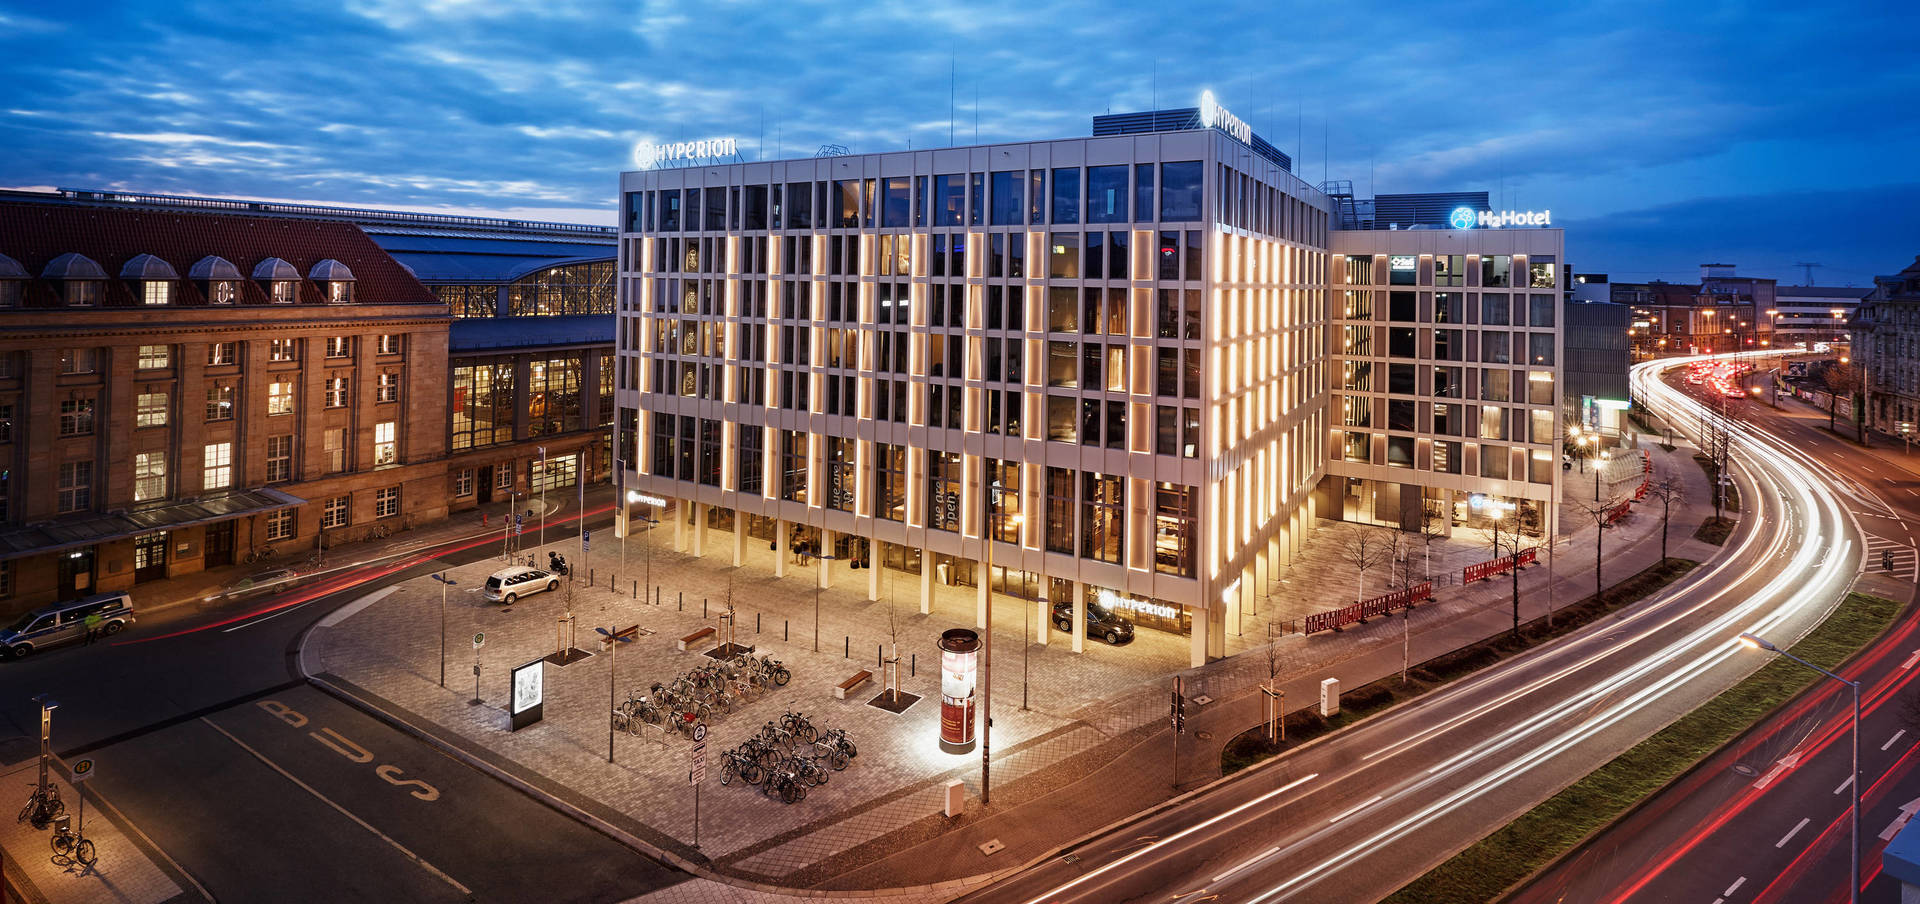 Exterior view of the Hyperion Hotel Leipzig - Official website